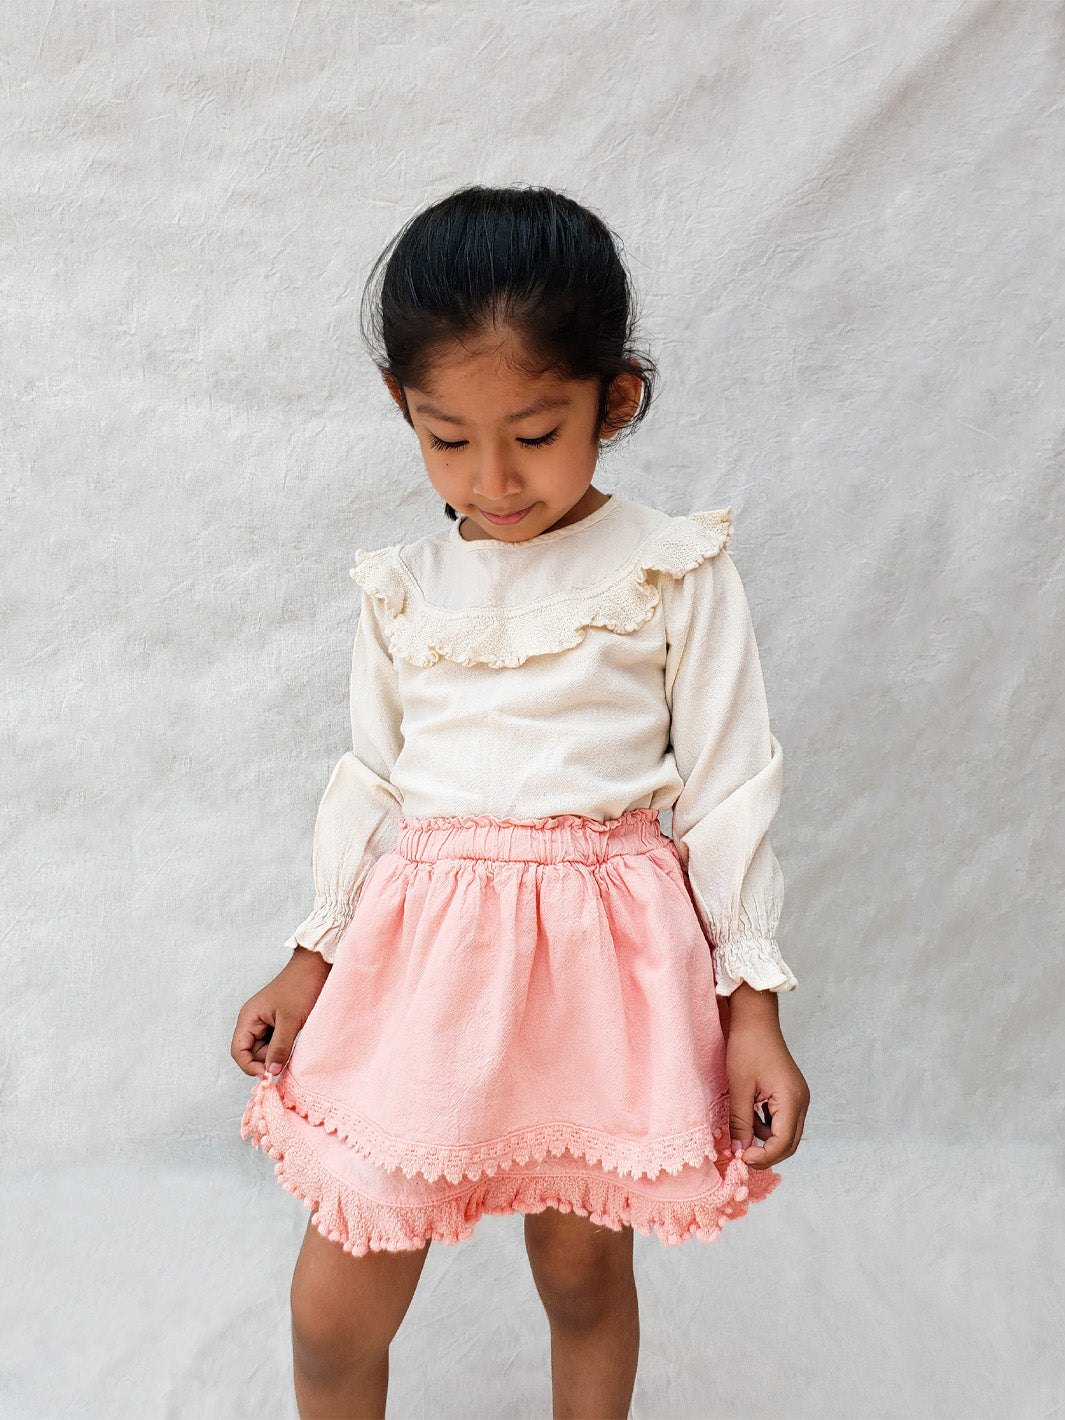 Our voluminous skirt Elise was made to bring happiness on sunny days! Its layers and nice embroidered details are inspired by the Peruvian traditional highland skirts, known as "polleras". Made with love in Peru in all-natural Peruvian cotton. Match this lovely skirt with any other top from any of our Liten Aventuris collections. Volangkjol. Flicka, Barn och Babis kläder. Kjol för flickar och babis. Cotton skirt, Bomullskjol.